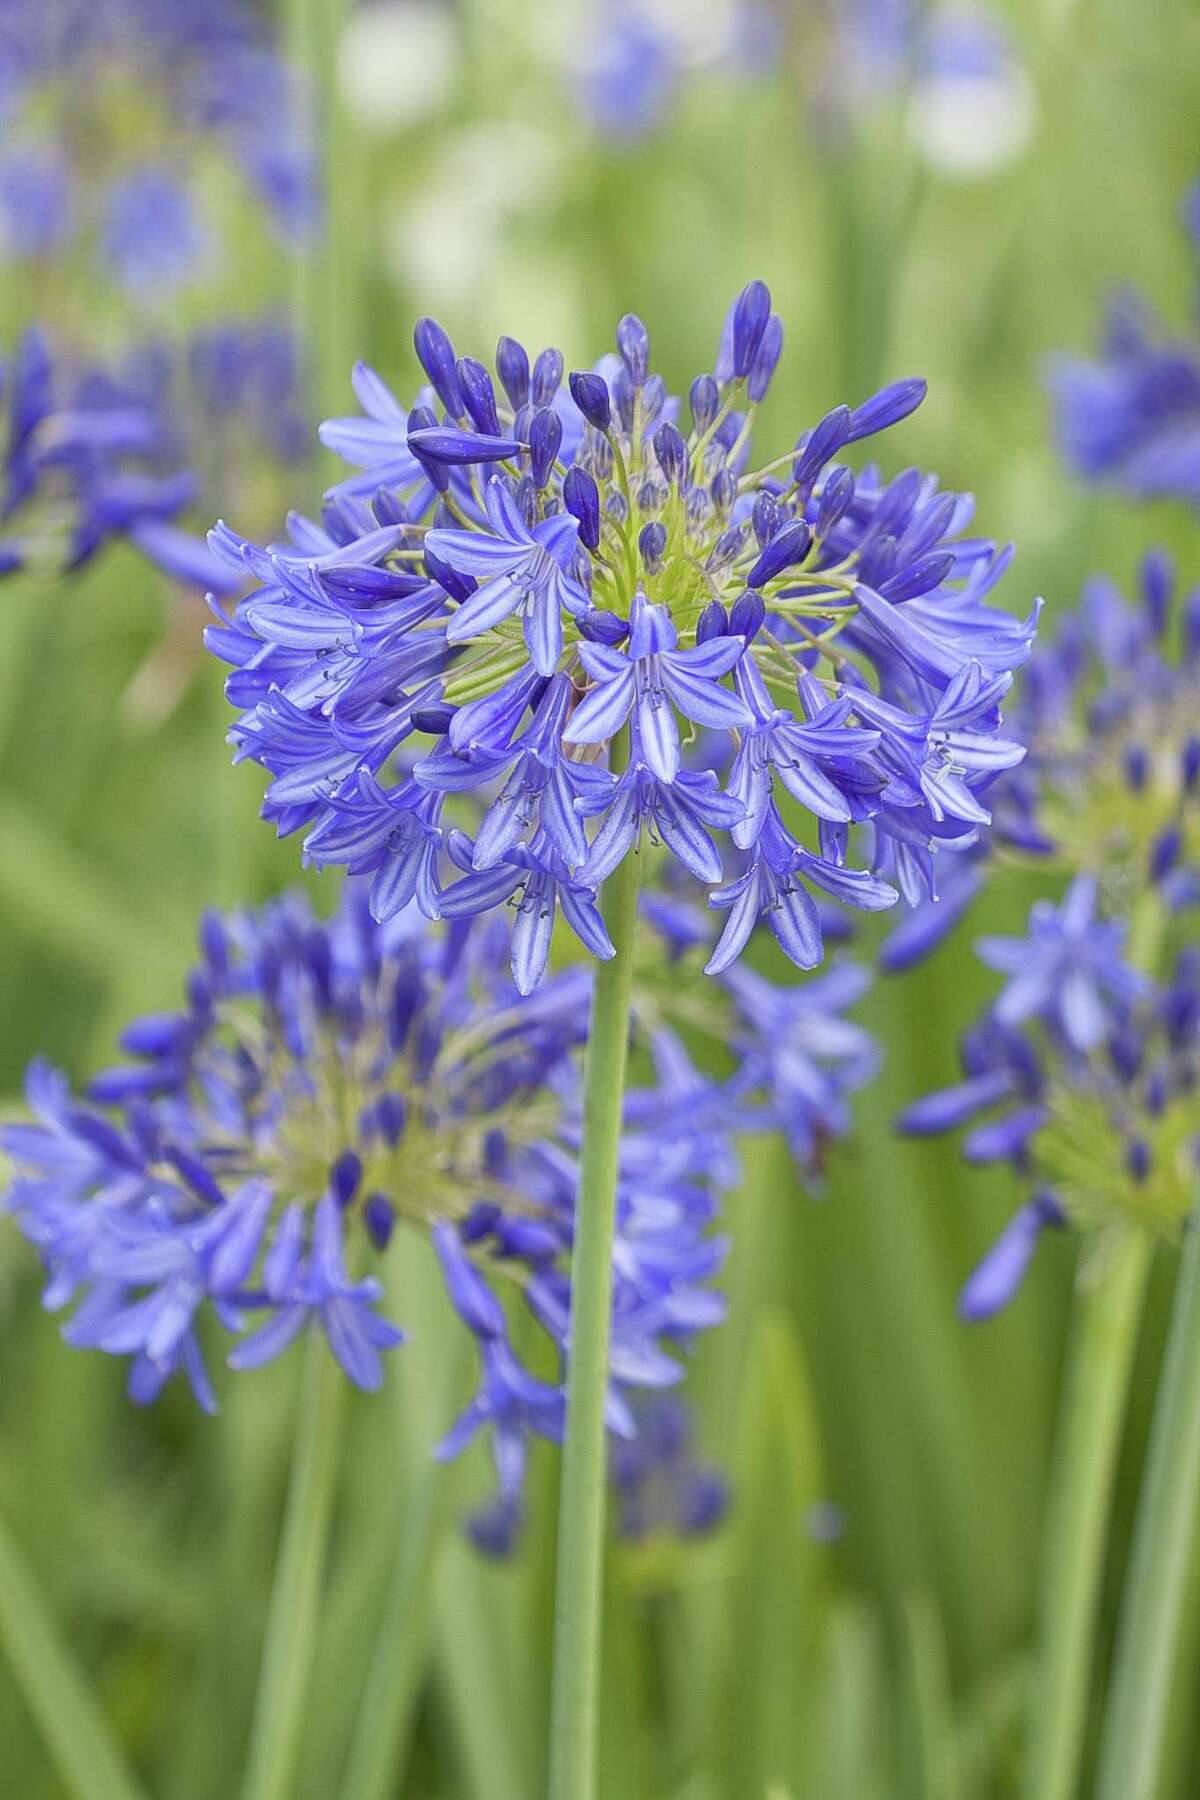 Agapanthus, or lily of the Nile, blooms with a soft blue burst of flowers.